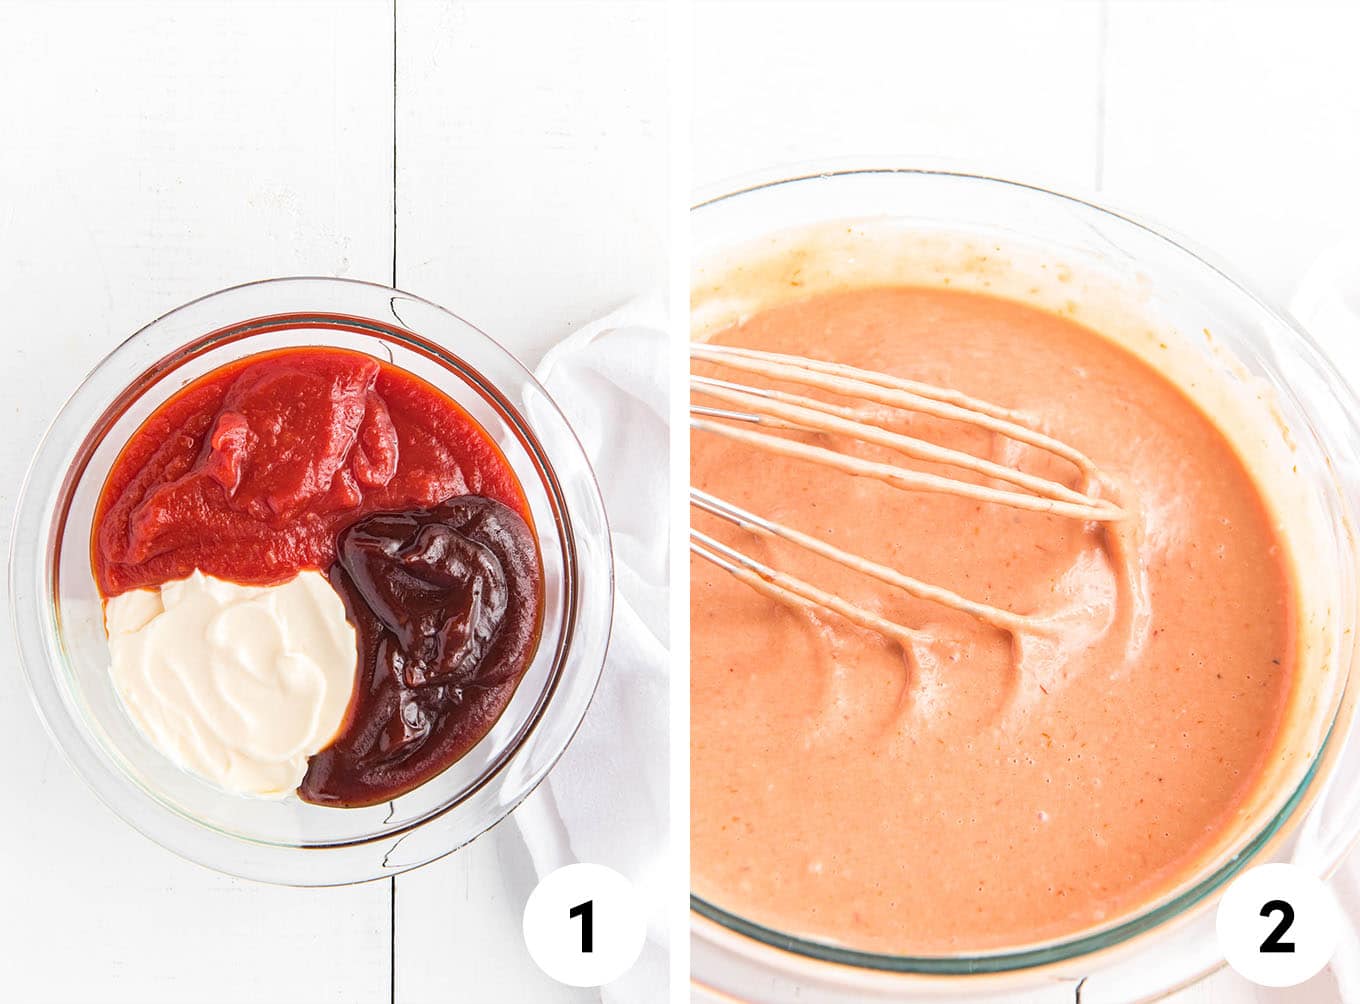 A collage showing all the ingredients in a bowl on the left and then on the right the sauce is mixed together with a whisk in the bowl.